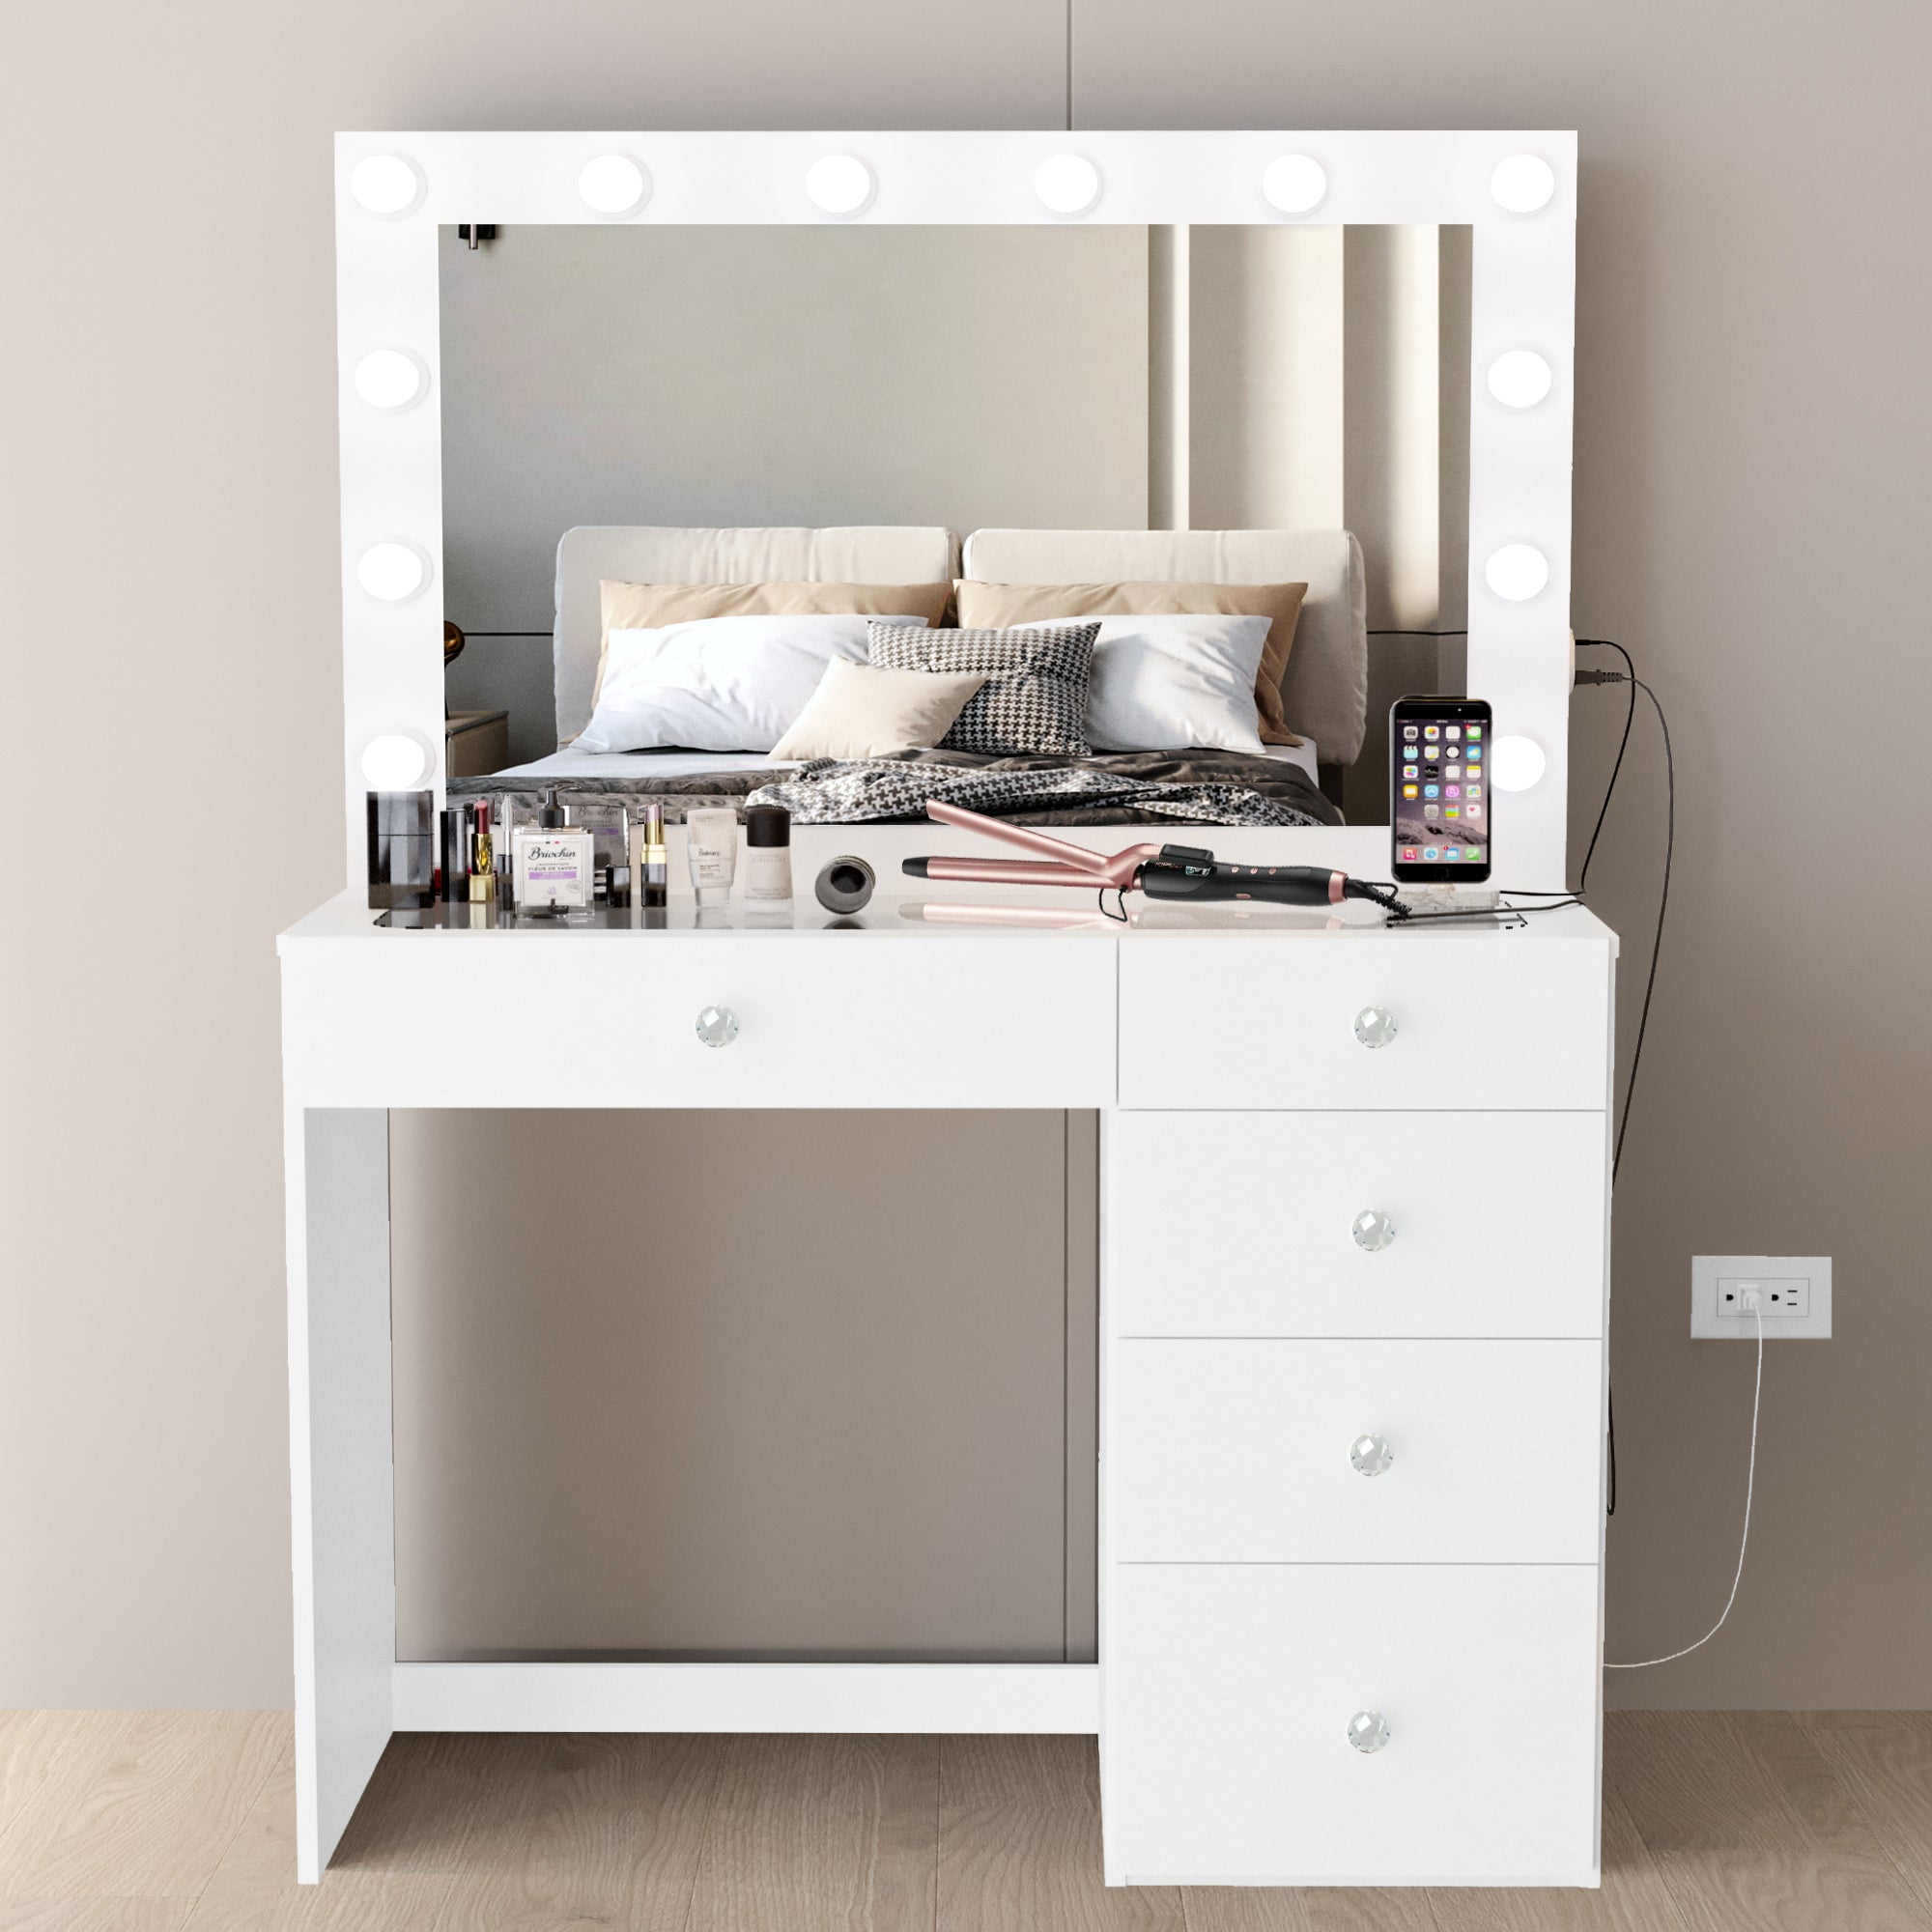 5 Mirror with Boahaus and White Vanity Desk Lights, Ball Knobs, Crystal Black Alana Drawers,